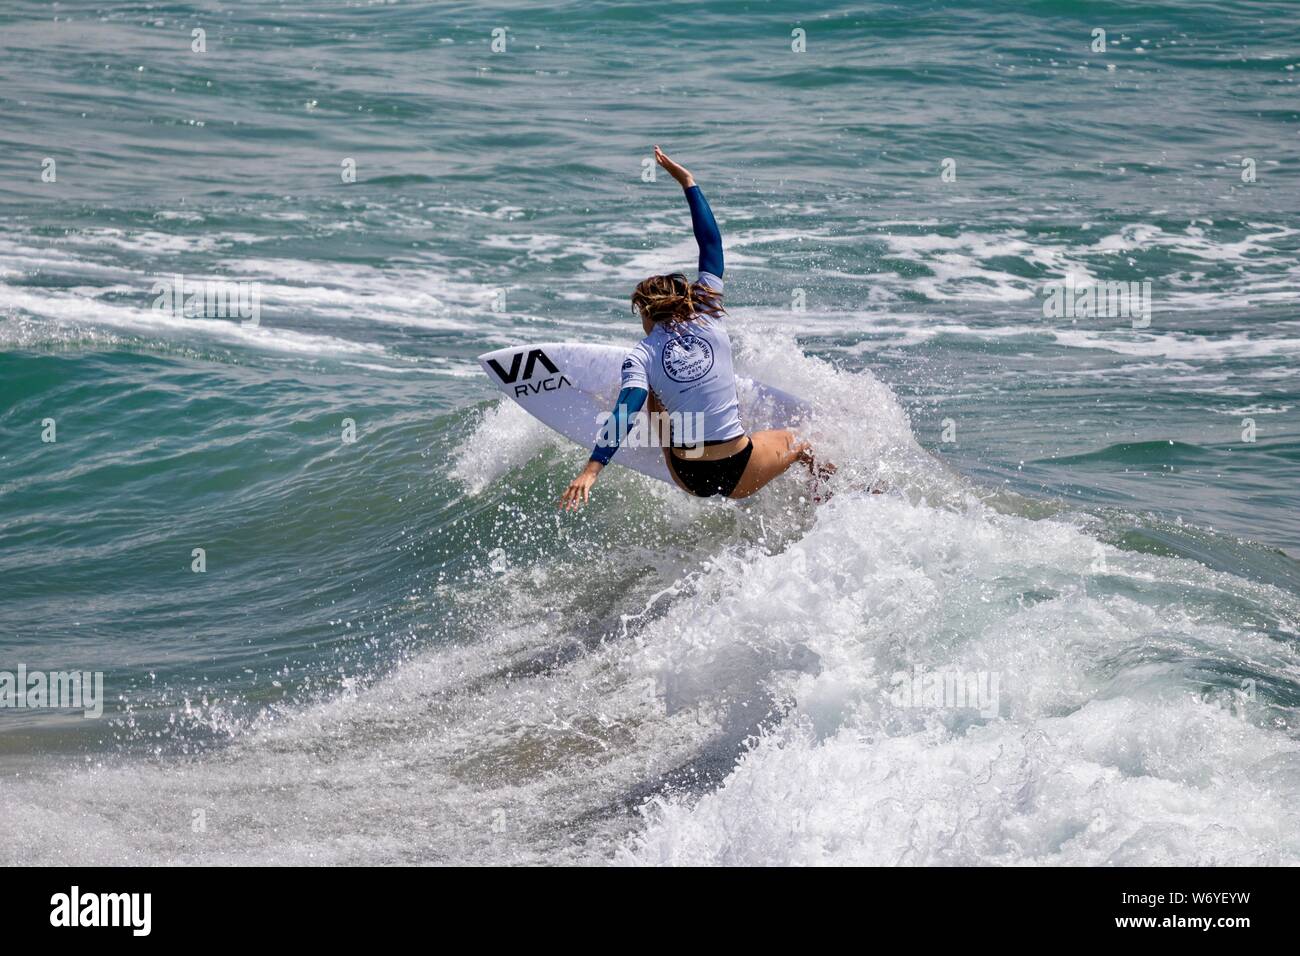 Maddie Garlough of the USA competing in the Vans US Open of Surfing 2019 Stock Photo